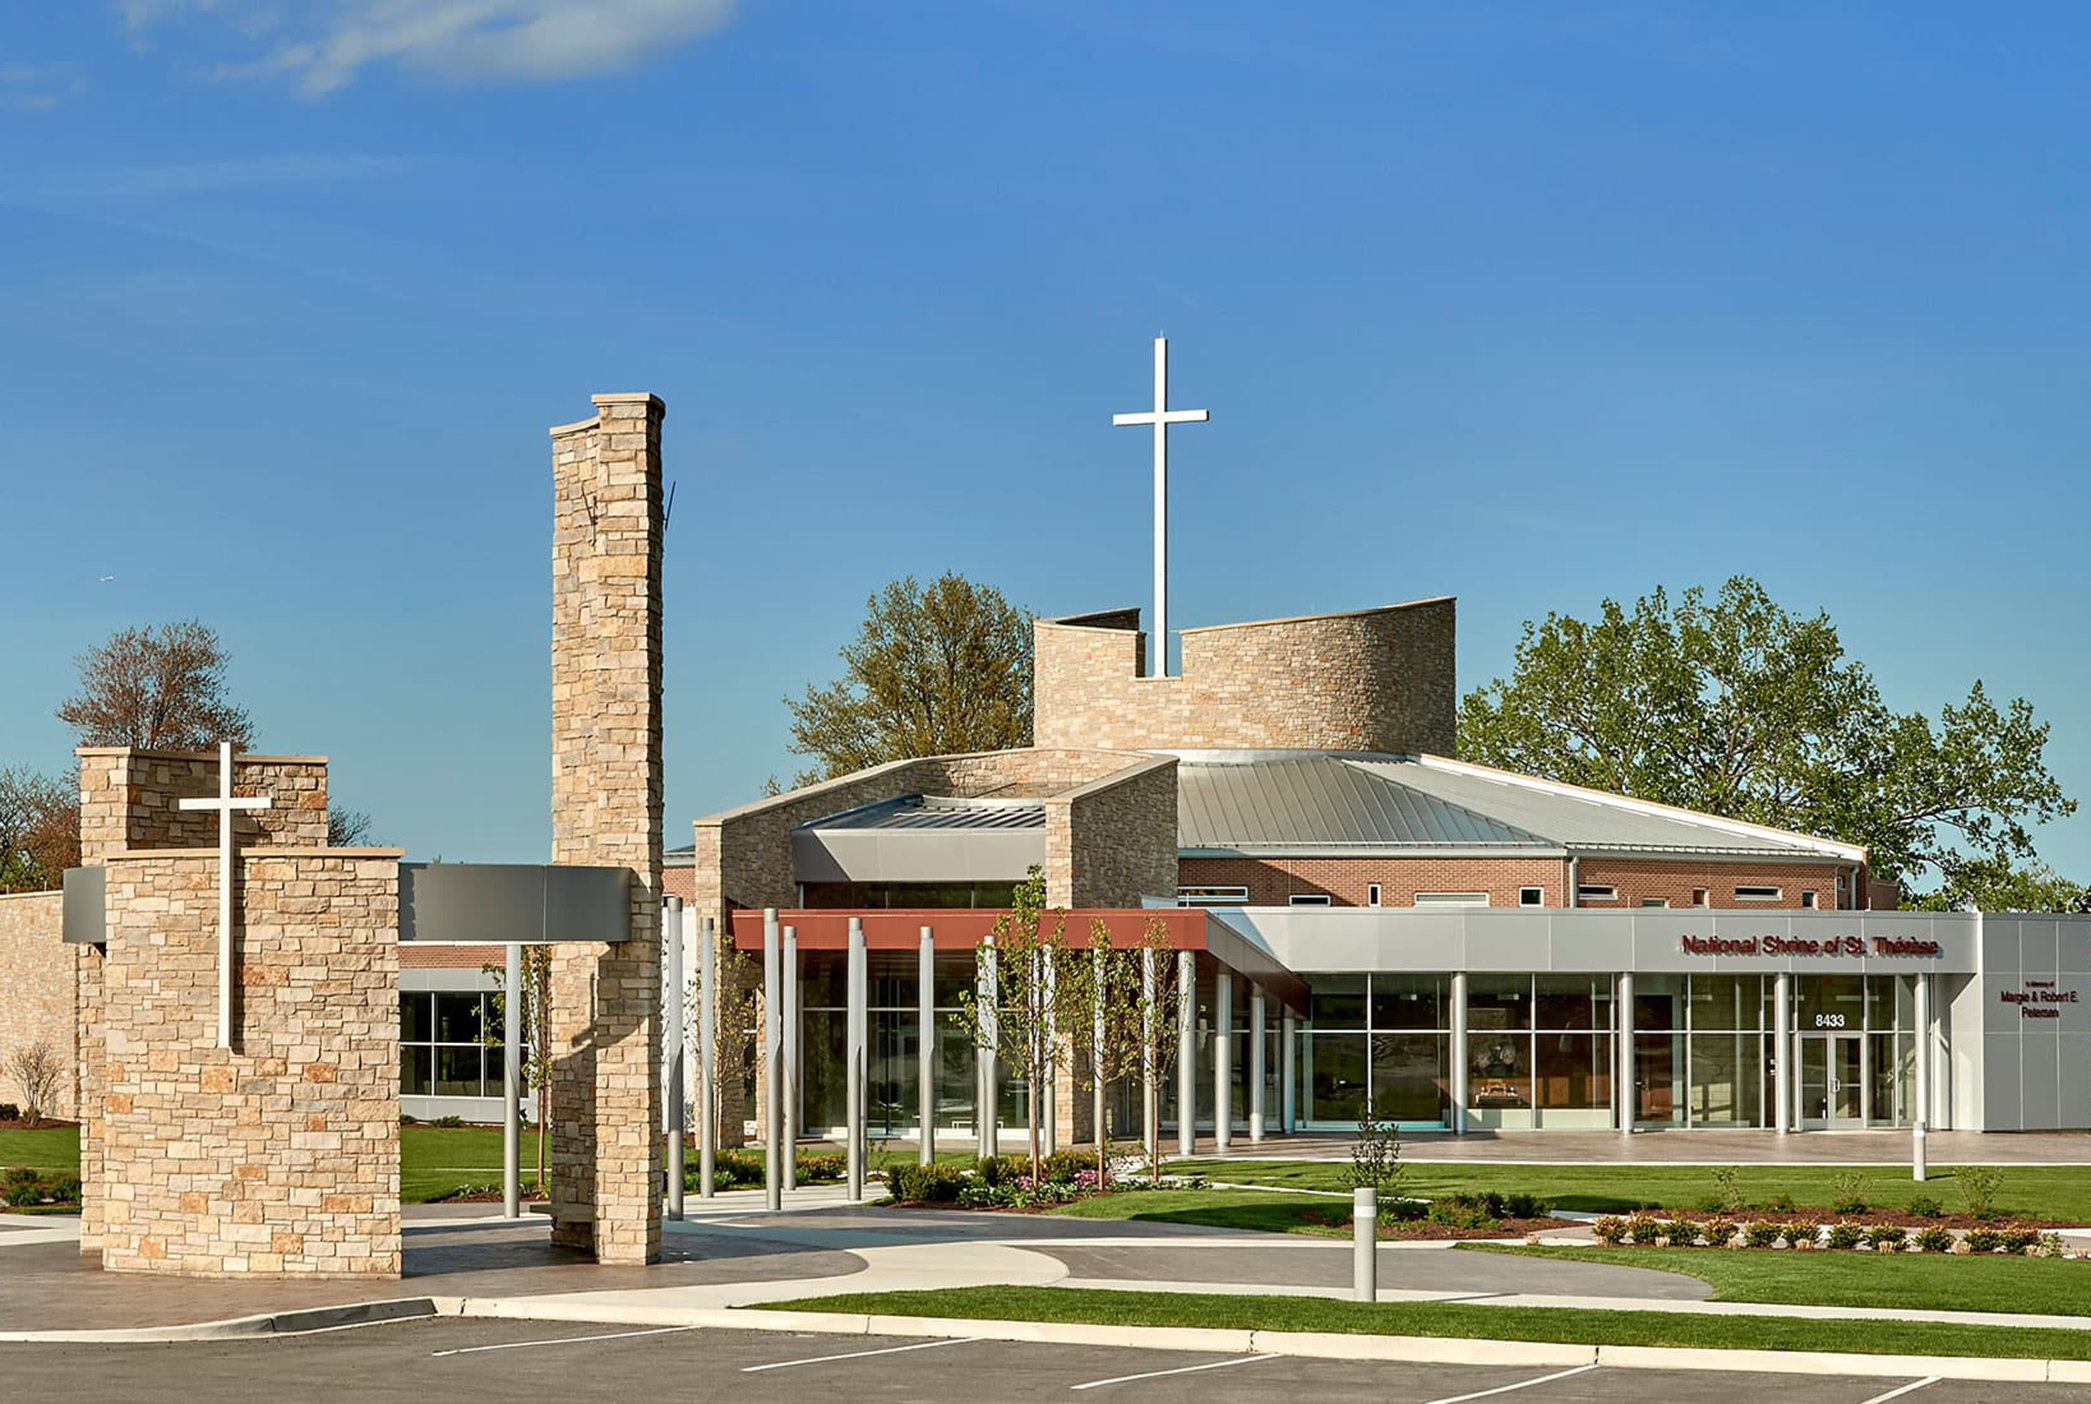 National Shrine of St. Therese Receives an “Excellence in Masonry” Award